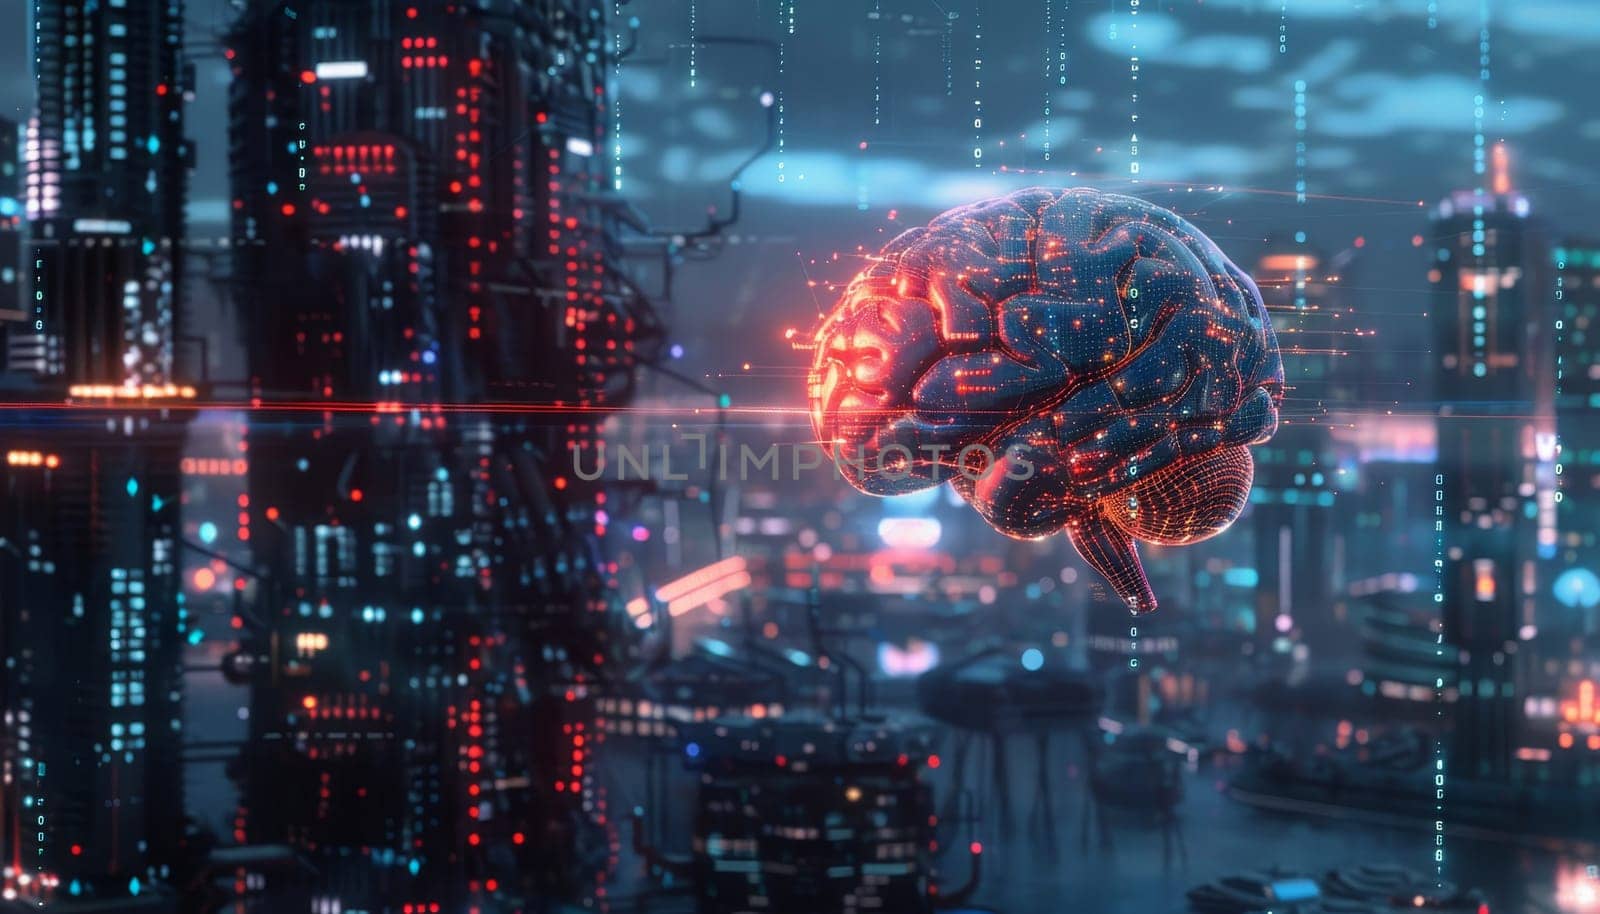 A brain is shown in a cityscape with a futuristic feel by AI generated image.